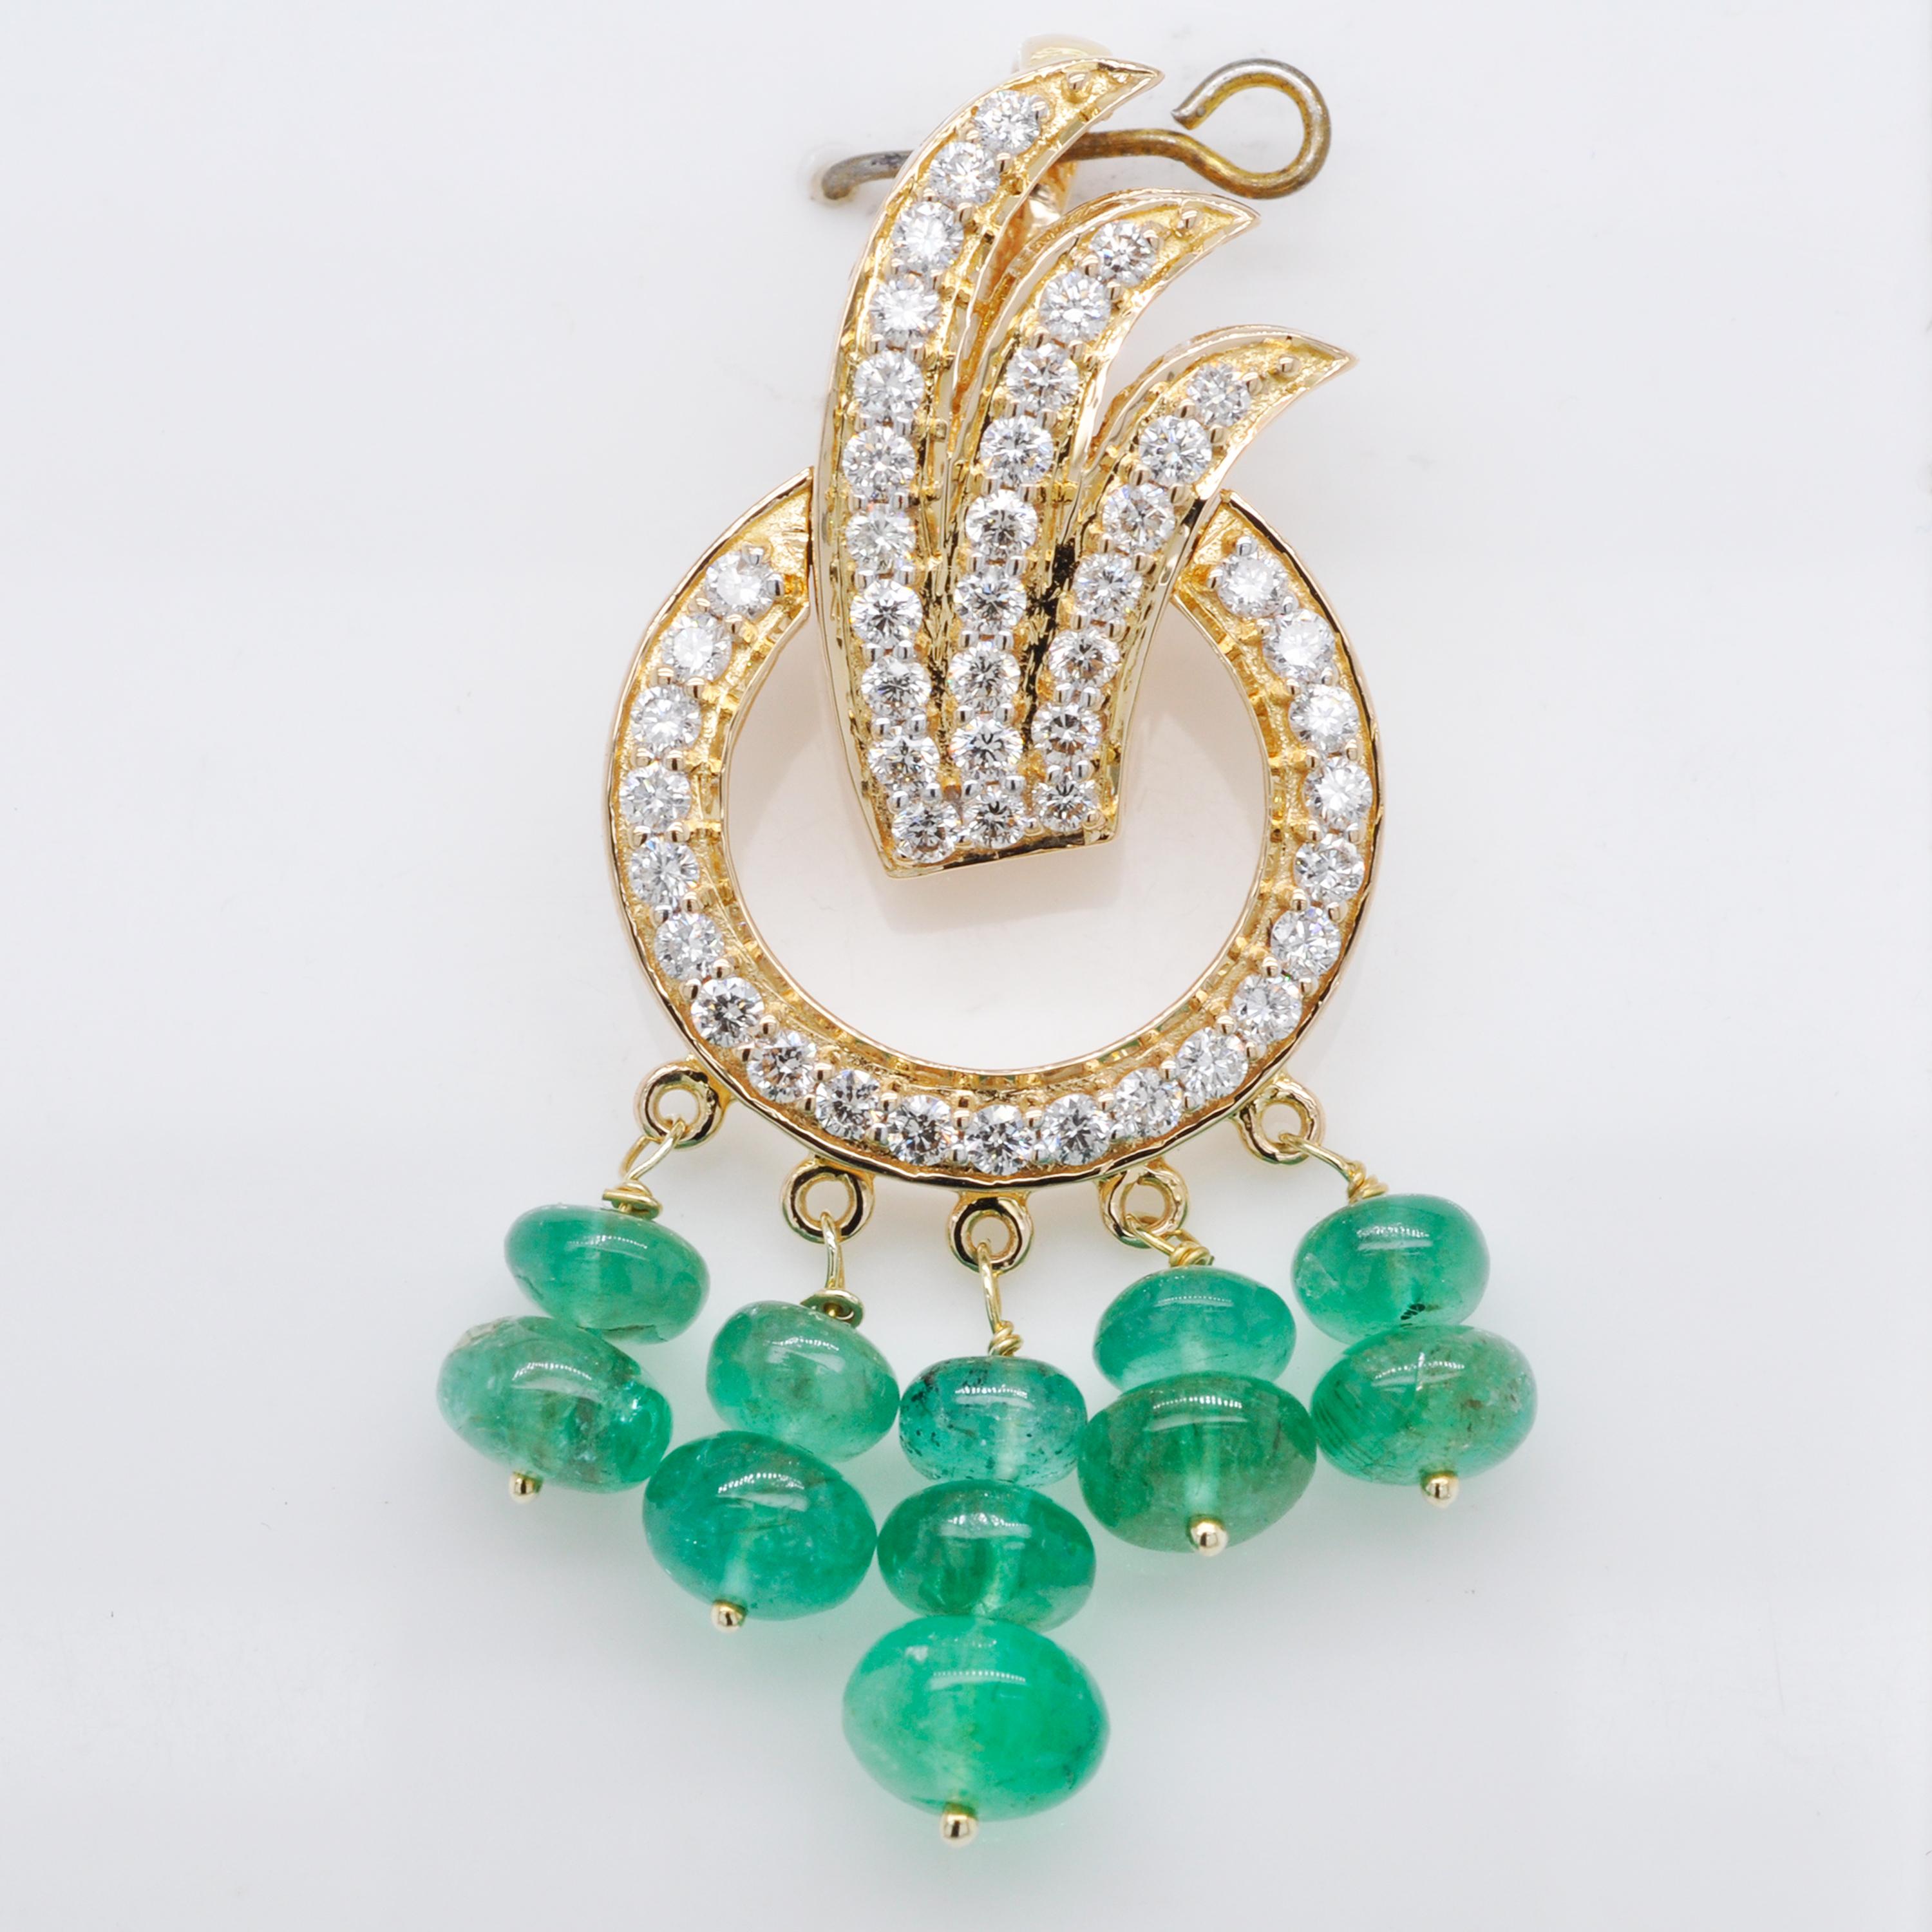 18 karat yellow gold diamond emerald beads pendant necklace dangle earrings set

This 18 karat gold pendant necklace dangle earrings set is a contemporary beauty. The set depicts three diamond feathers encircled by a diamond ring. A touch of green